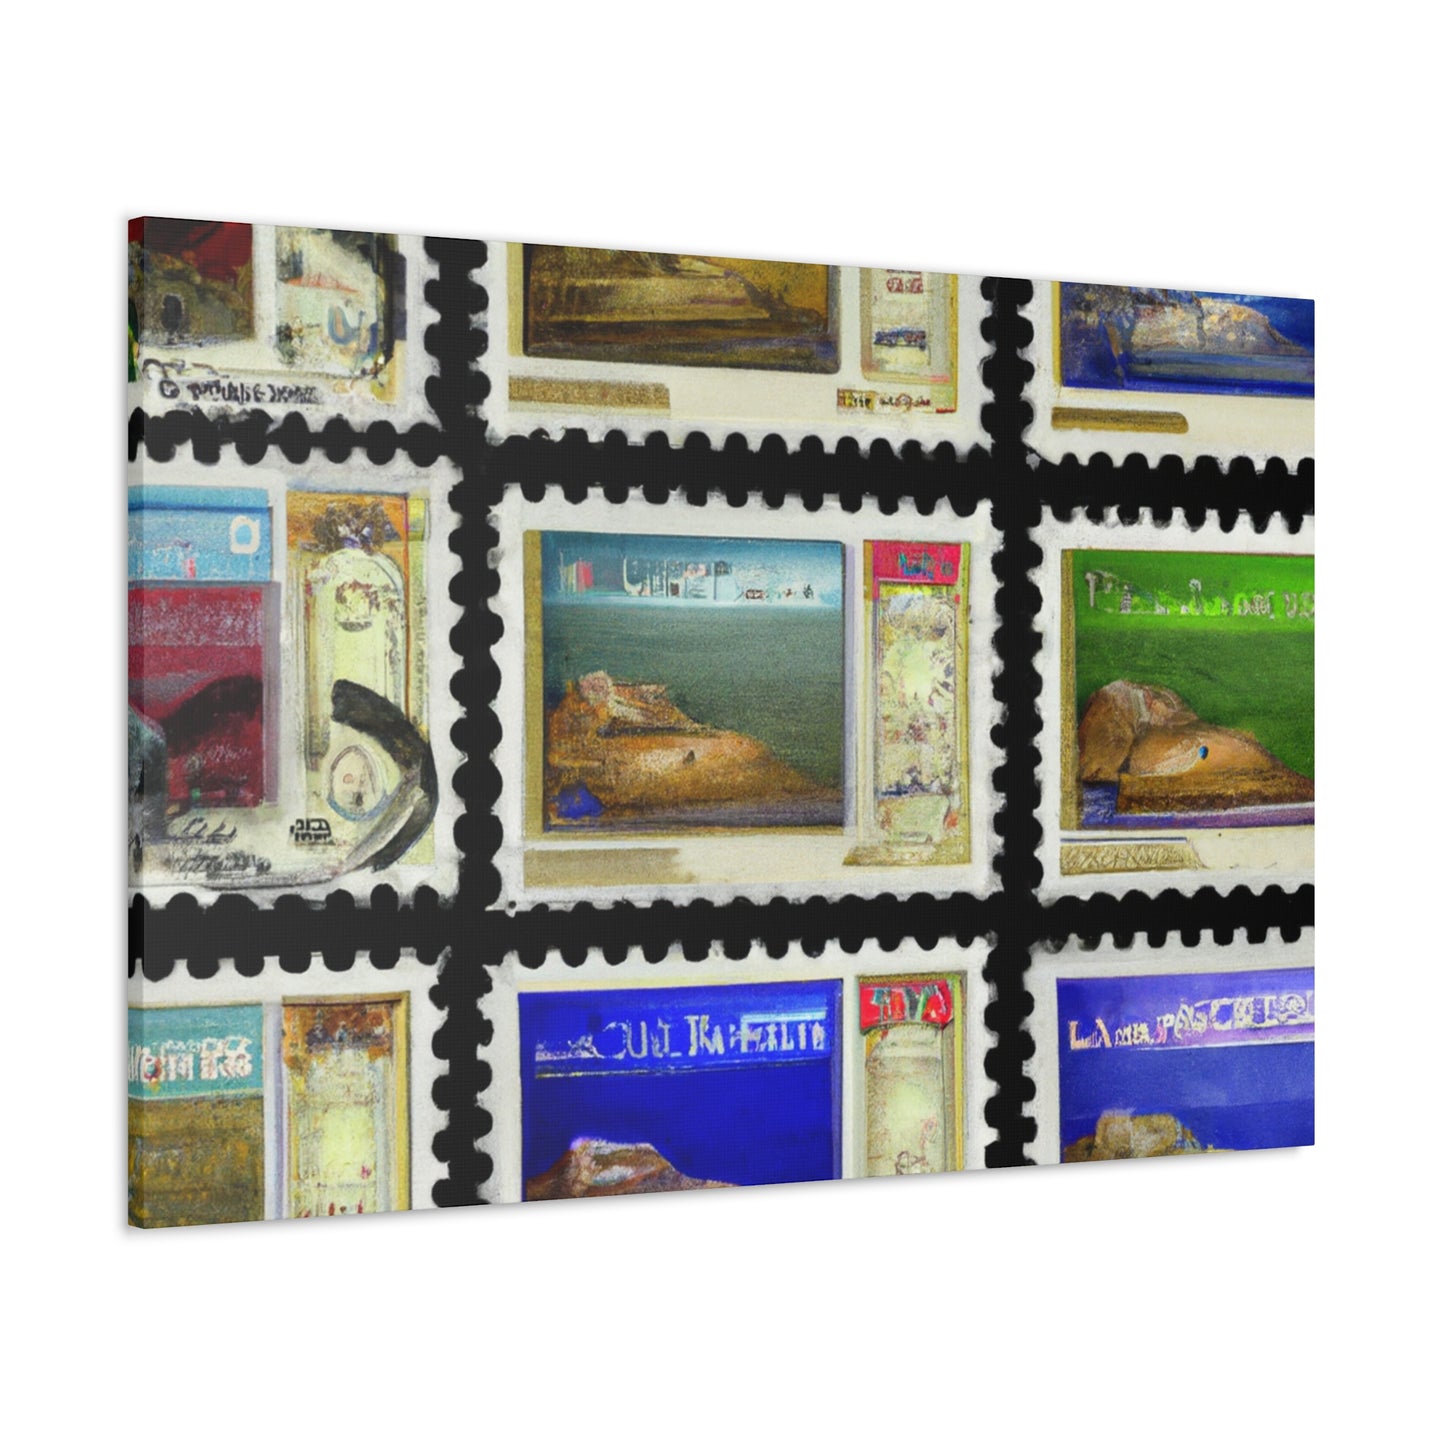 Celebrations of Culture Stamps - Postage Stamp Collector Canvas Wall Art